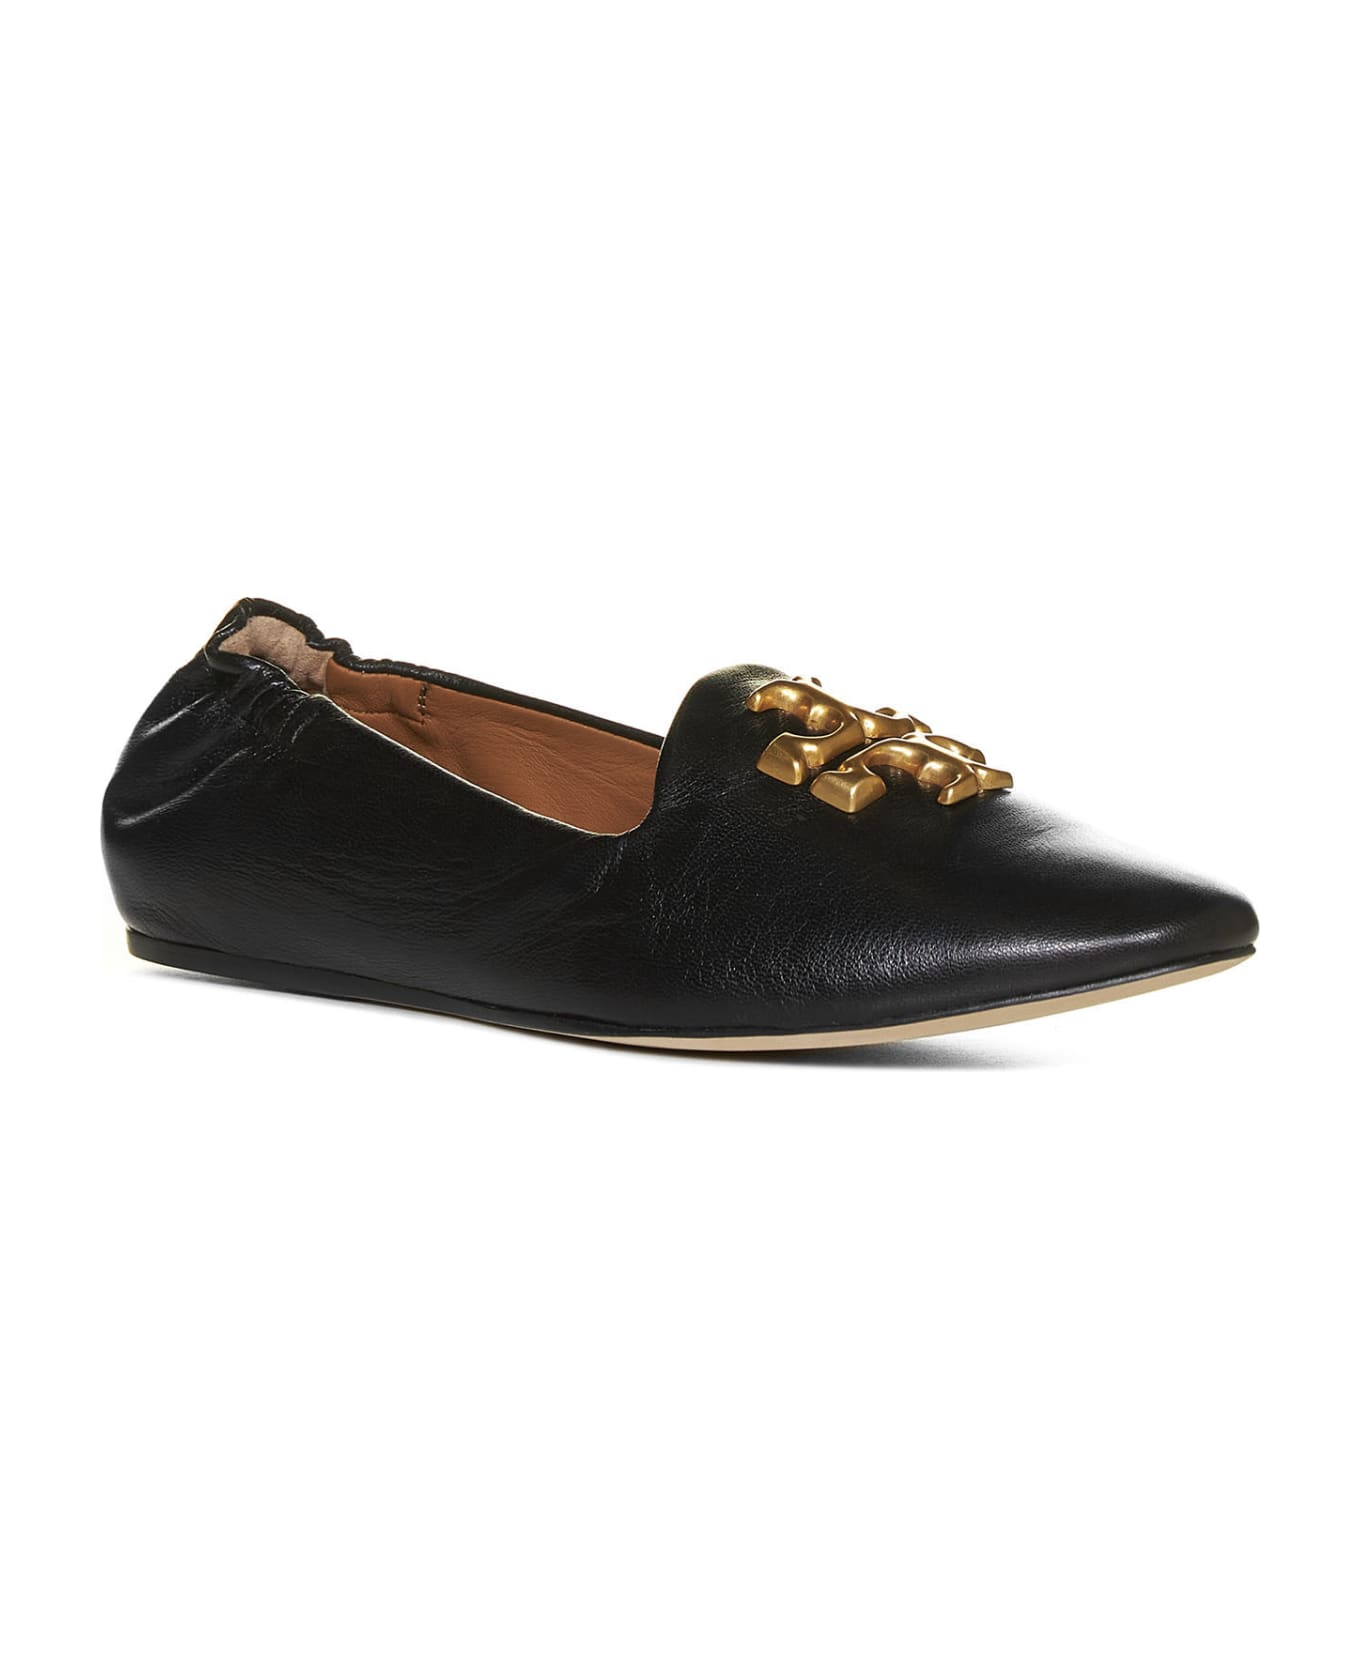 Tory Burch Eleanor Loafers - Perfect black